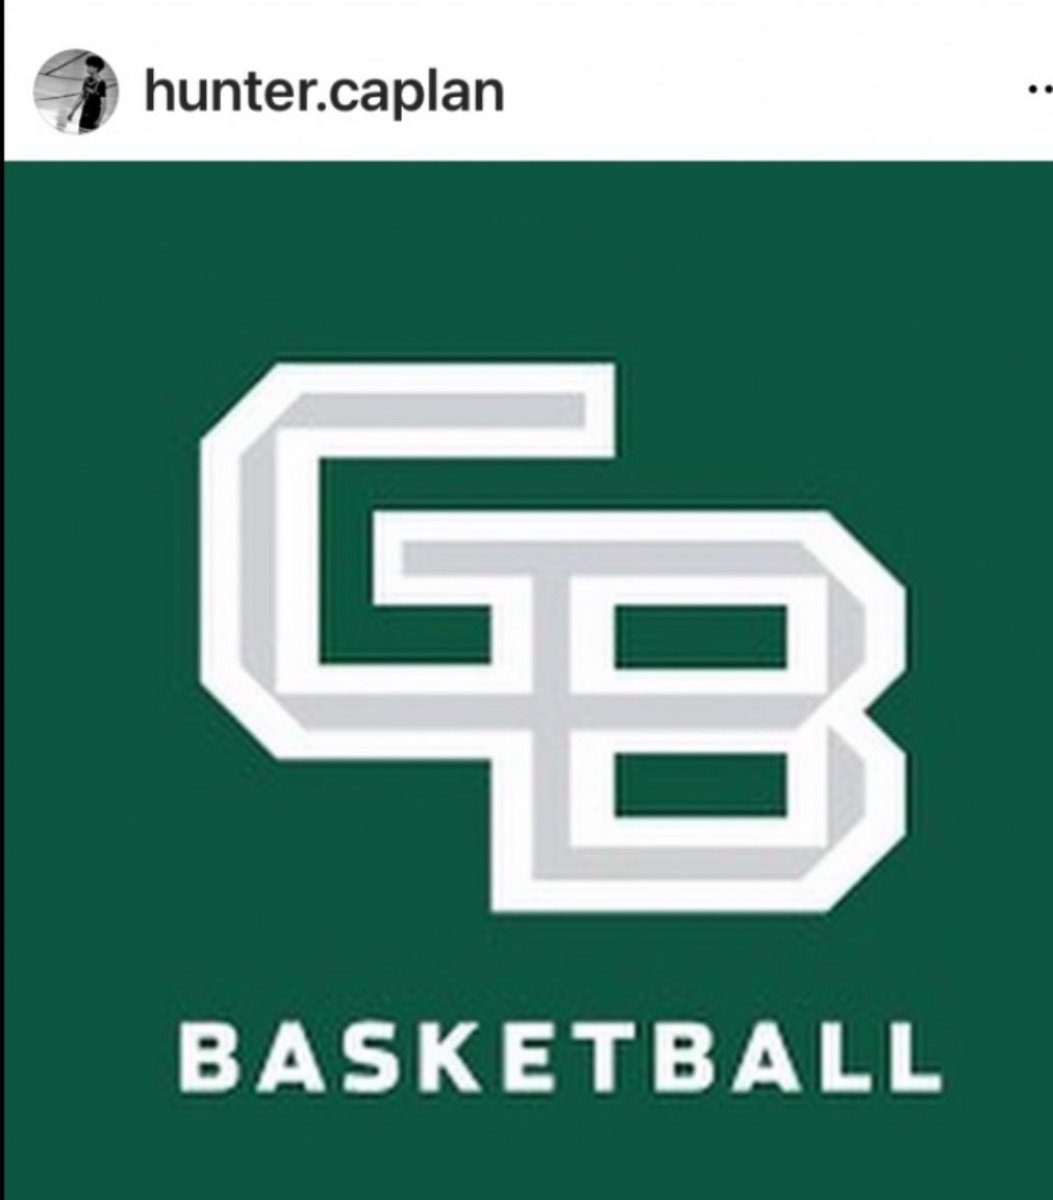 Doug Gottlieb and Wisconsin-Green Bay wasting no time getting after it Offer for Brentwood sophomore-to-be Hunter Caplan